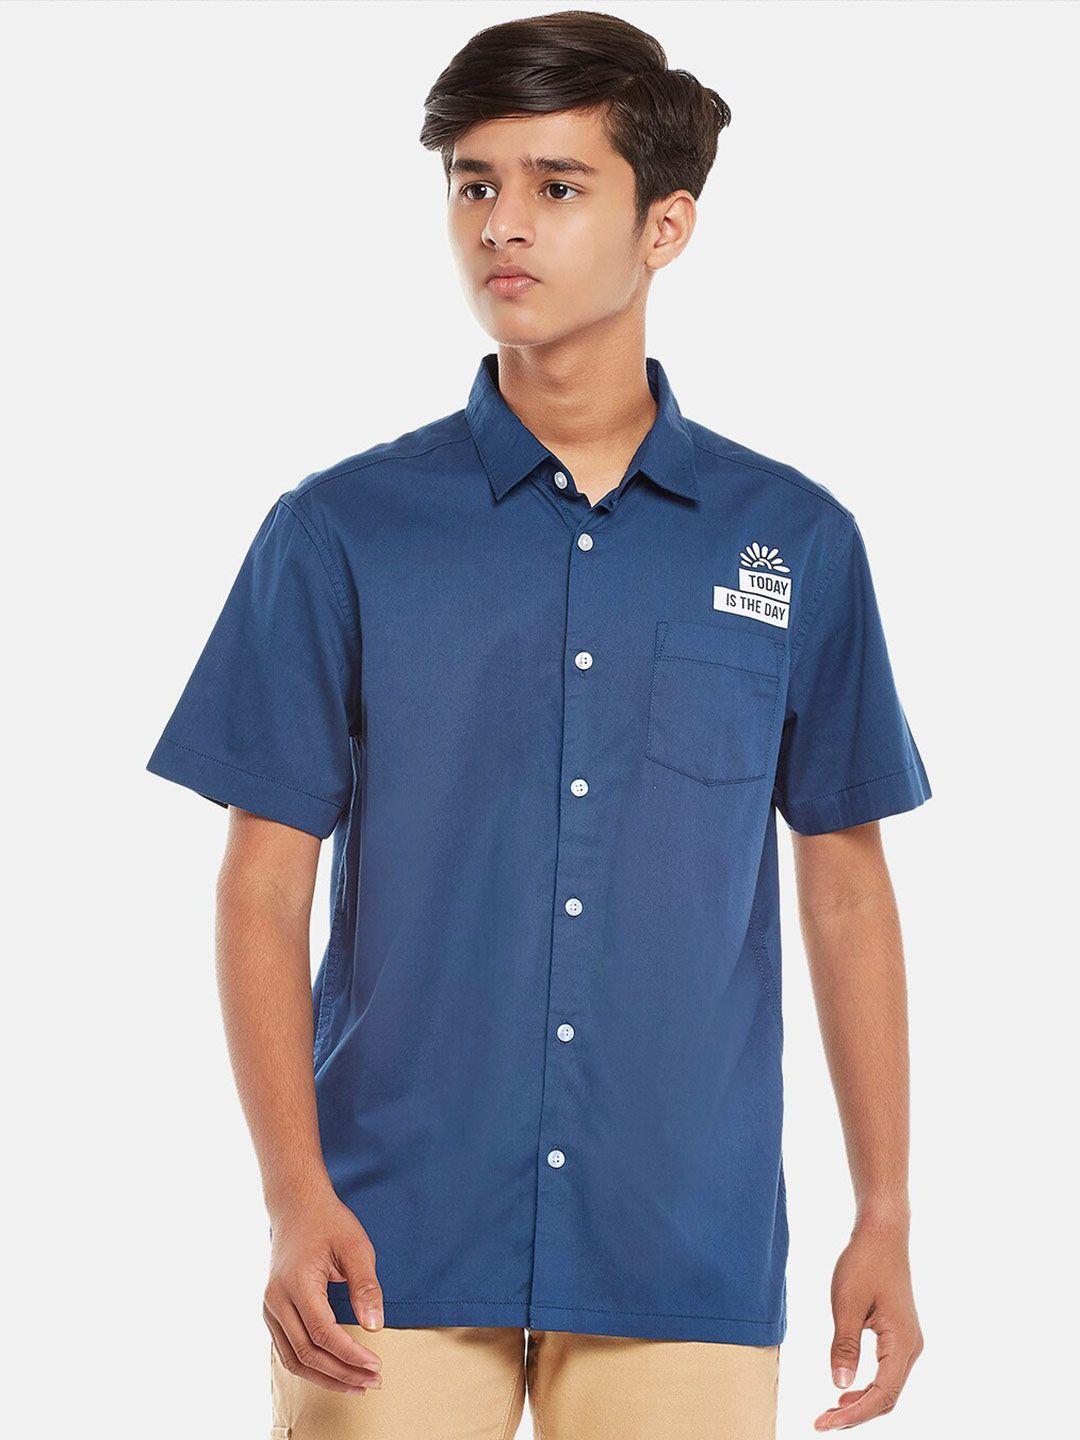 coolsters by pantaloons boys navy blue casual shirt